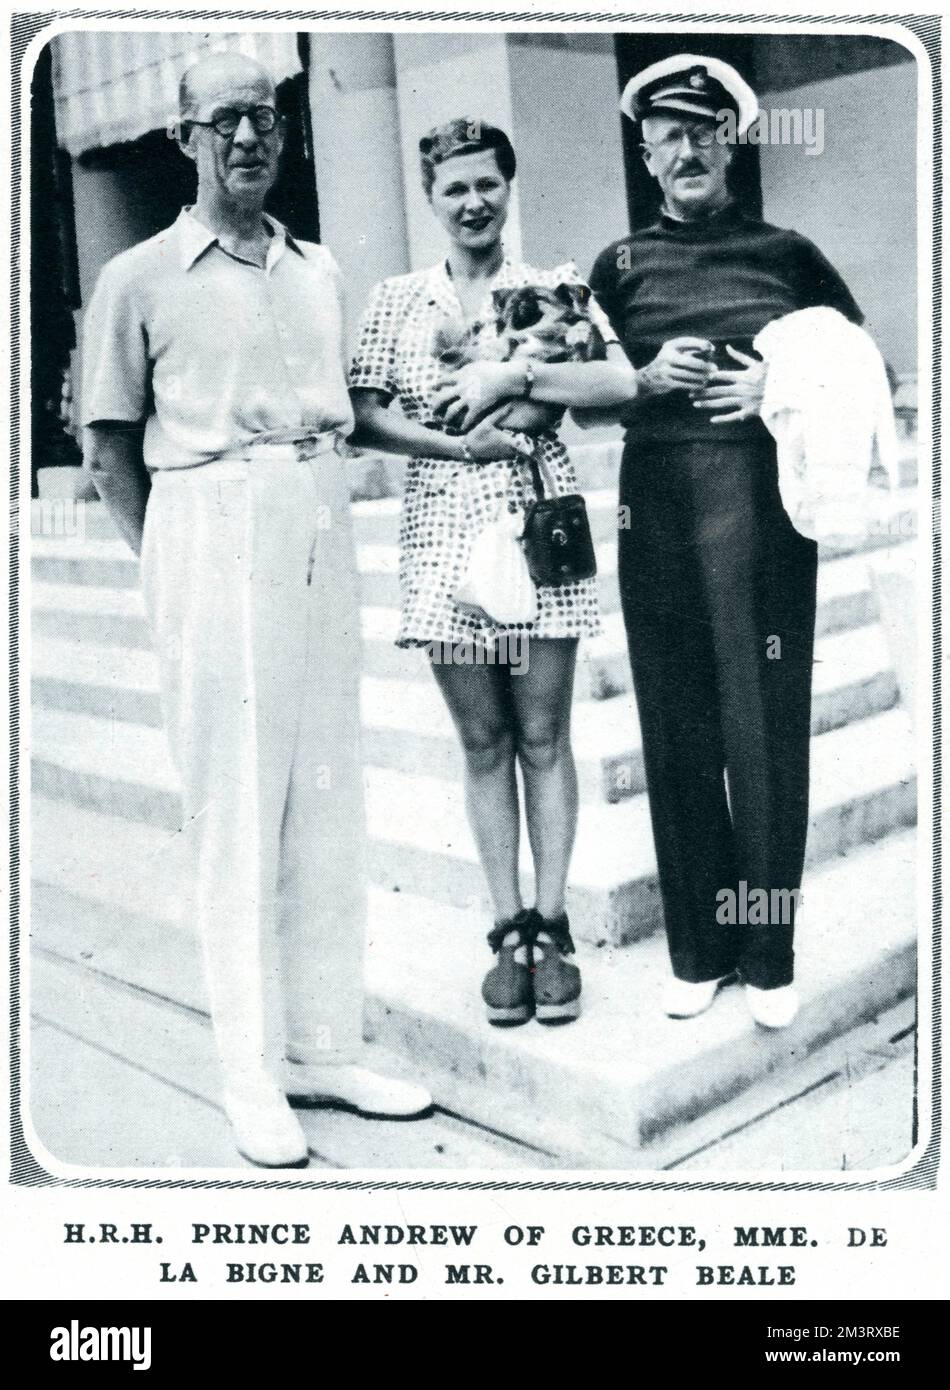 H.R.H. Prince Andrew of Greece, father of Prince Philip, Duke of Edinburgh, pictured with Mme. Andree de la Bigne and Mr. Gilbert Beale.  The Prince, who lived on the Riviera in his latter years when he separated from his wife, Princess Alice of Battenberg, was a guest on board Gilbert Beale's yacht, the Susannah Jane.  Andree de la Bigne was the Prince's mistress.    1938 Stock Photo